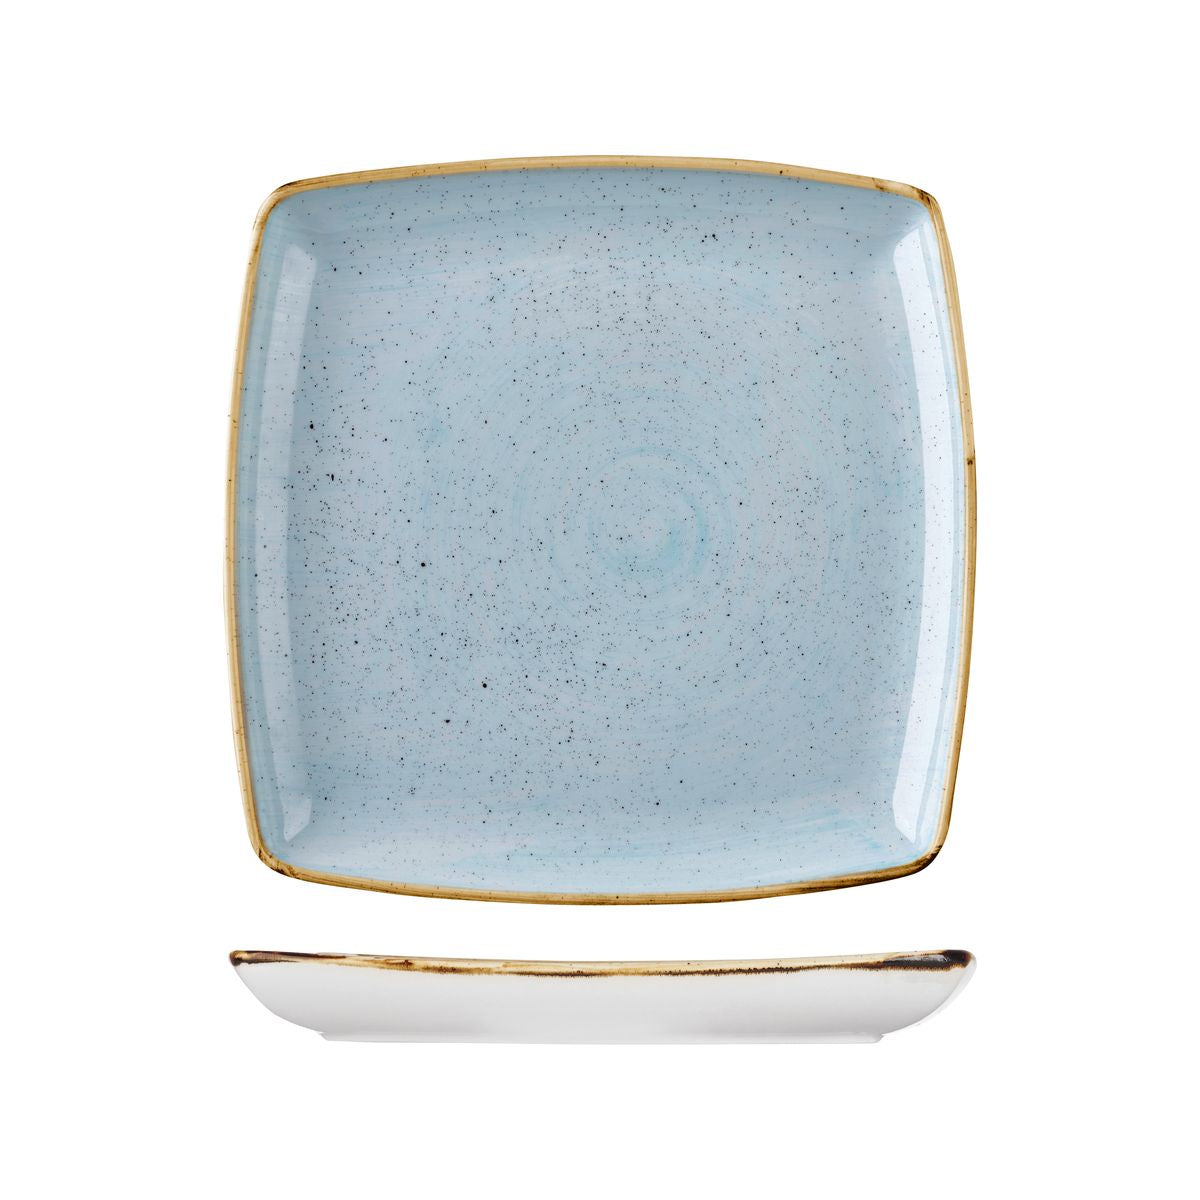 Stonecast Deep Square Plate | Duck Egg Blue 268x268mm